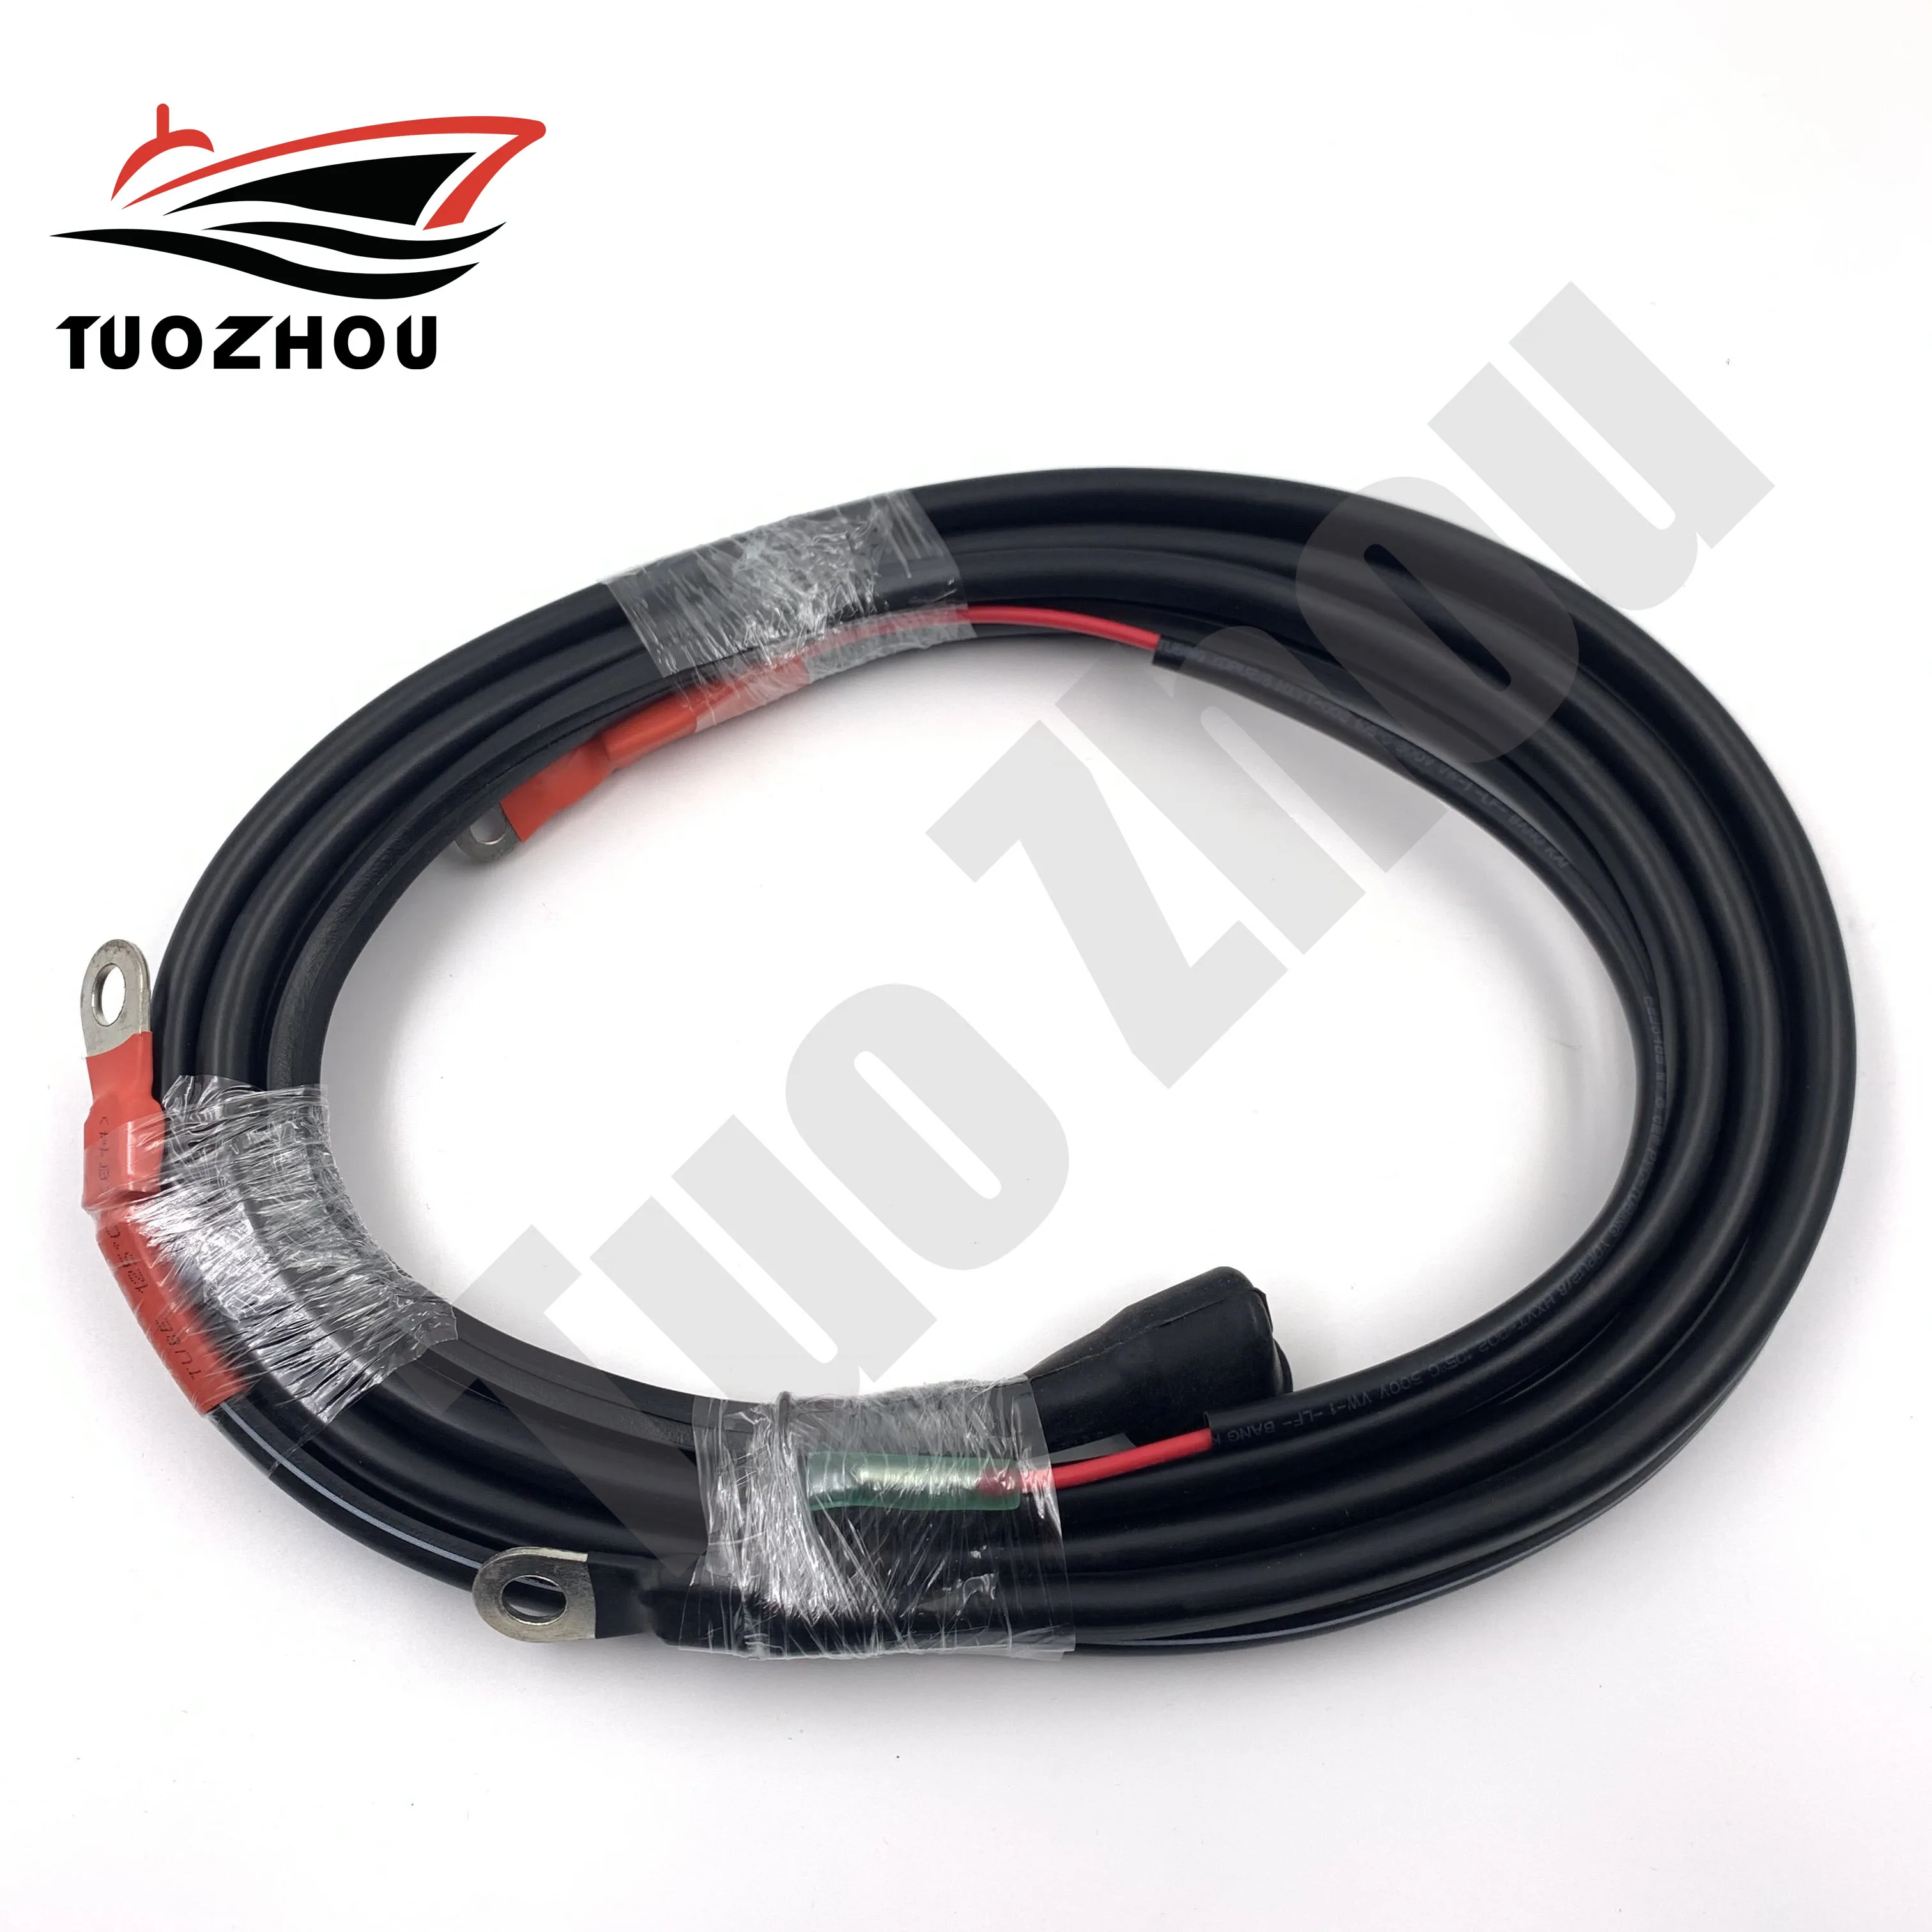 

Battery Cable 2.2M 66T-82105-00 Fit for Yamaha Outboard Engine 7FT